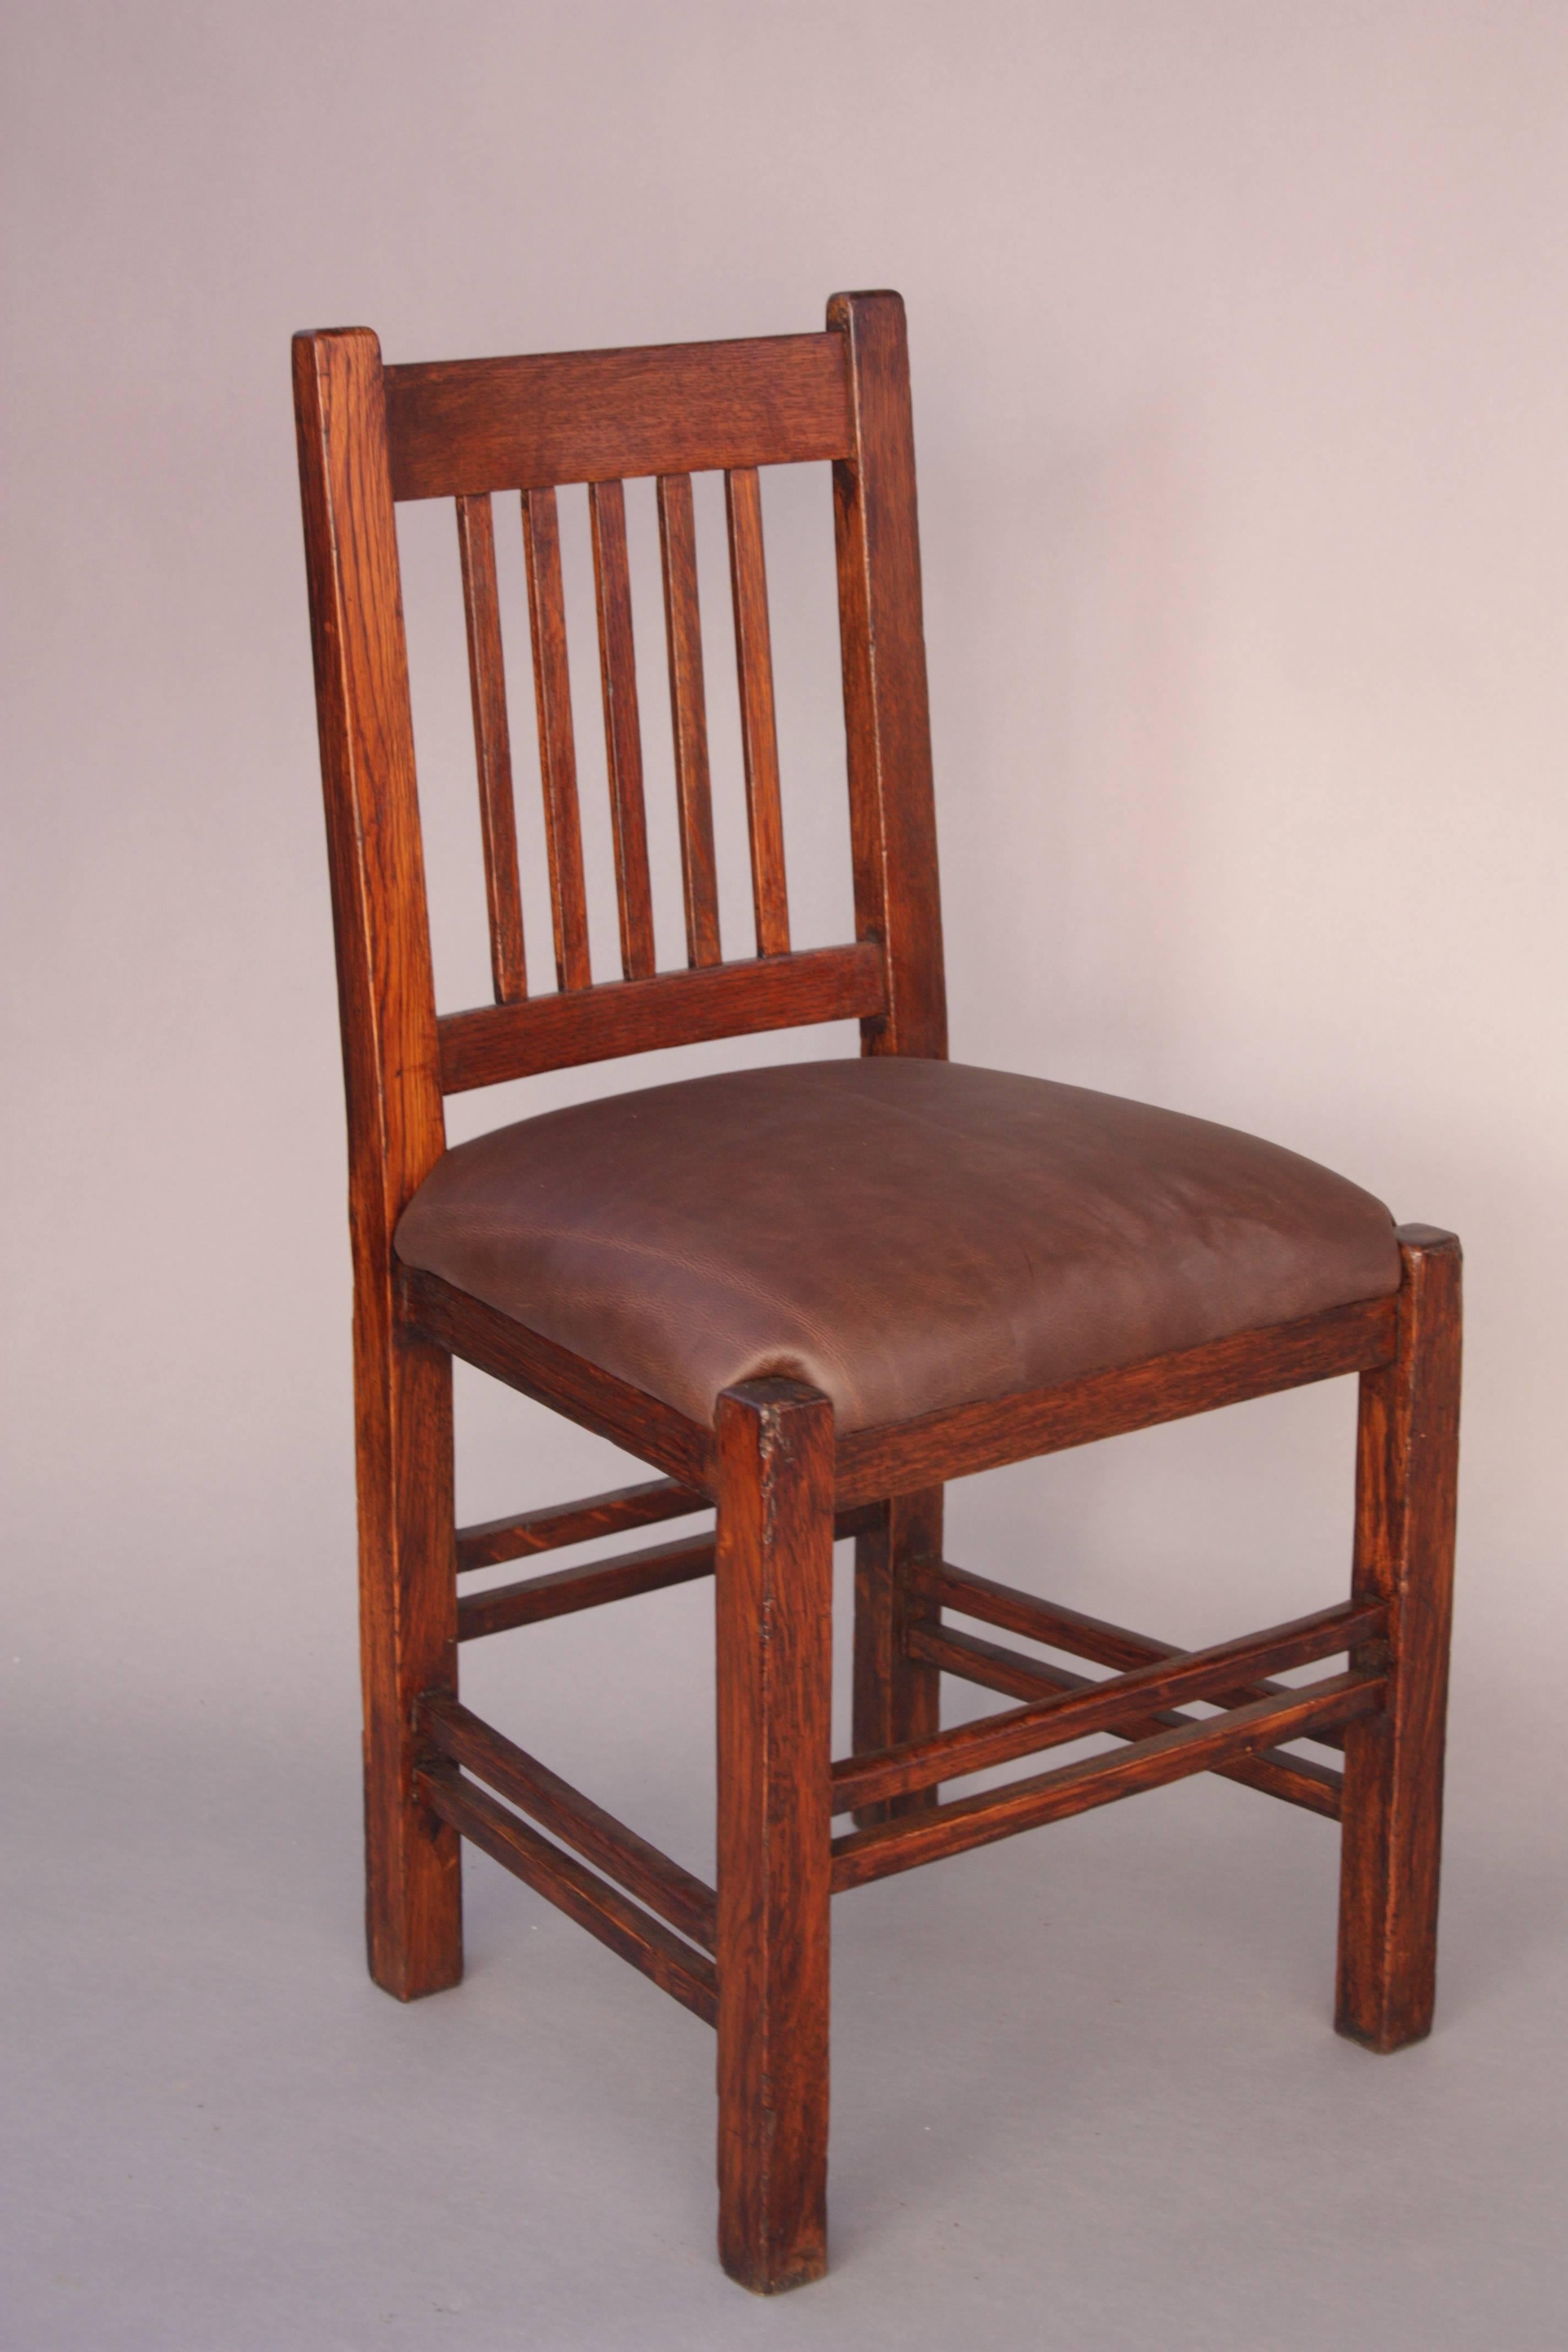 American Arts and Crafts Side Chair with Spindles